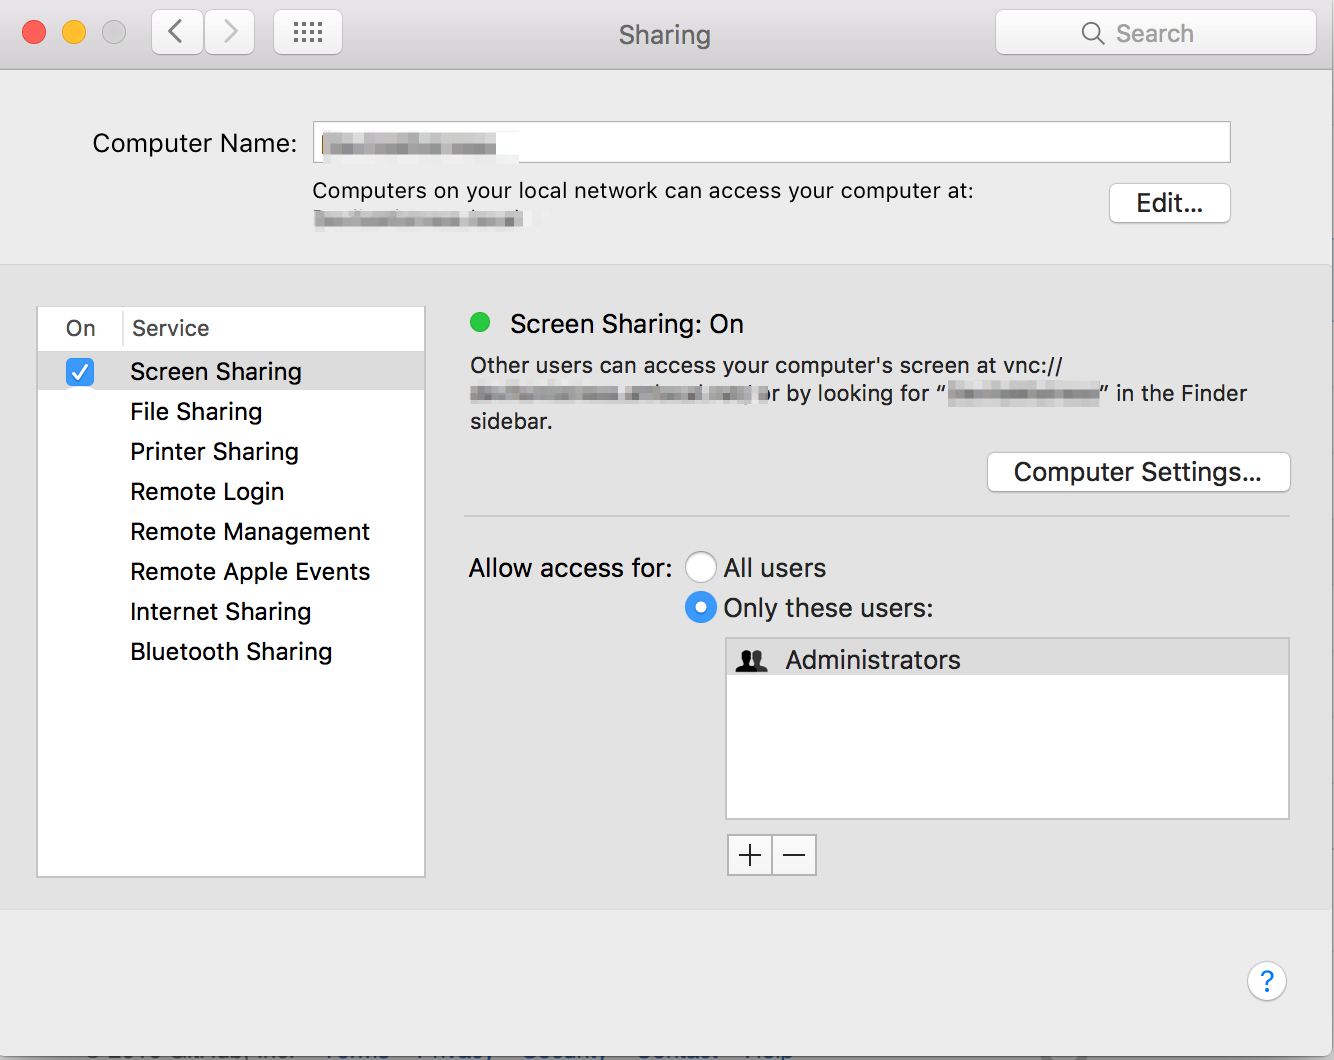 vnc viewer for mac 10.9